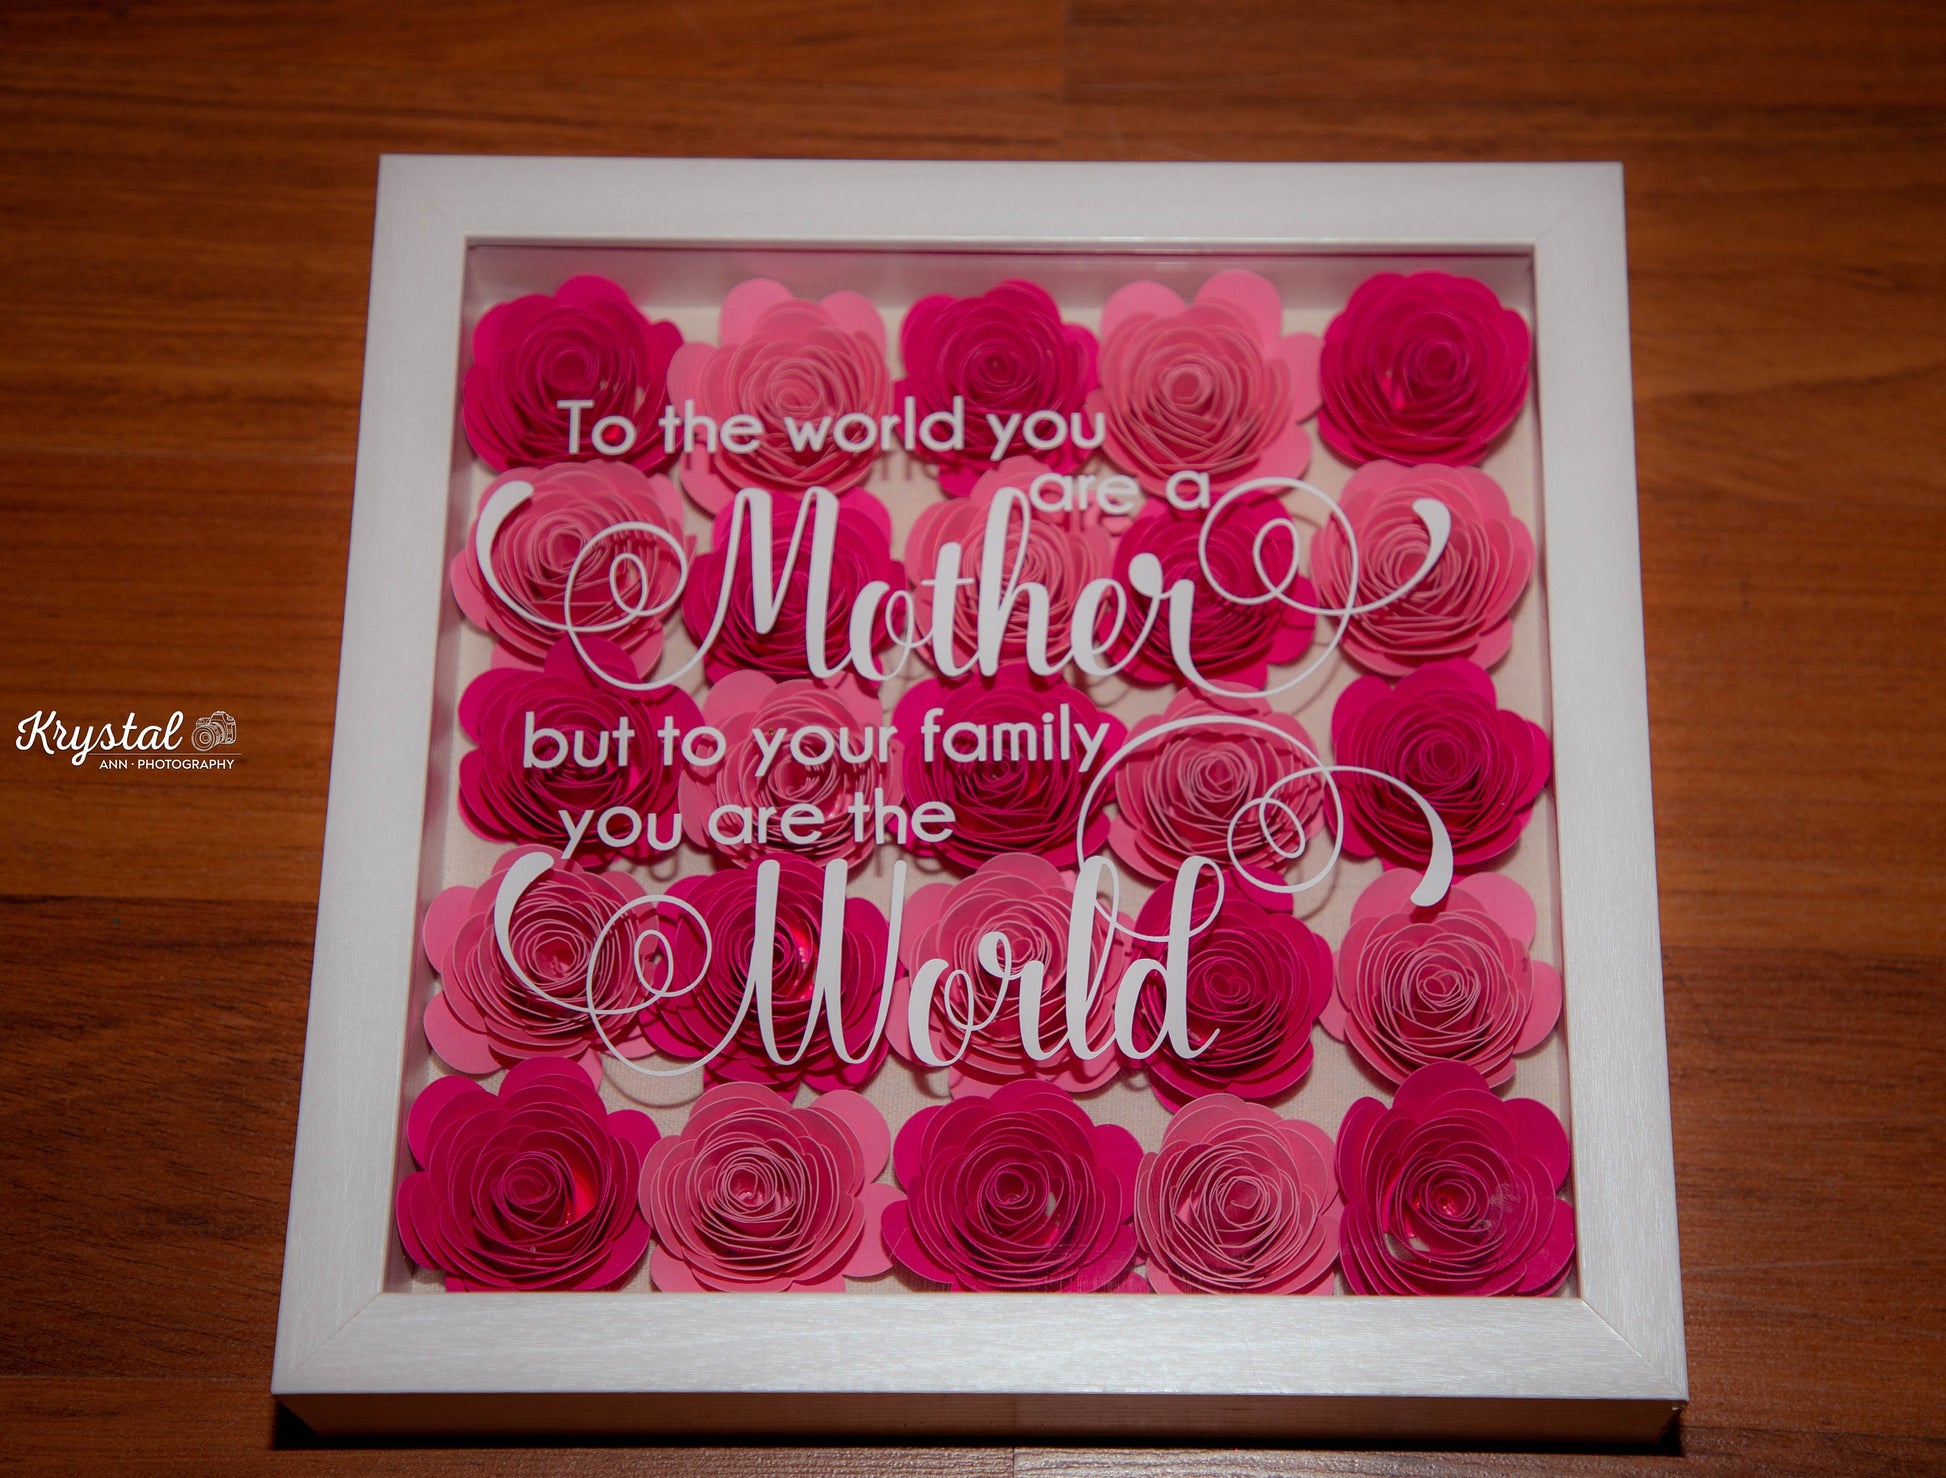 Custom Hand Rolled Paper Flower Gift Shadow Box Mothers Day gift, Gift for Wife or Fiance | Gift for Mom